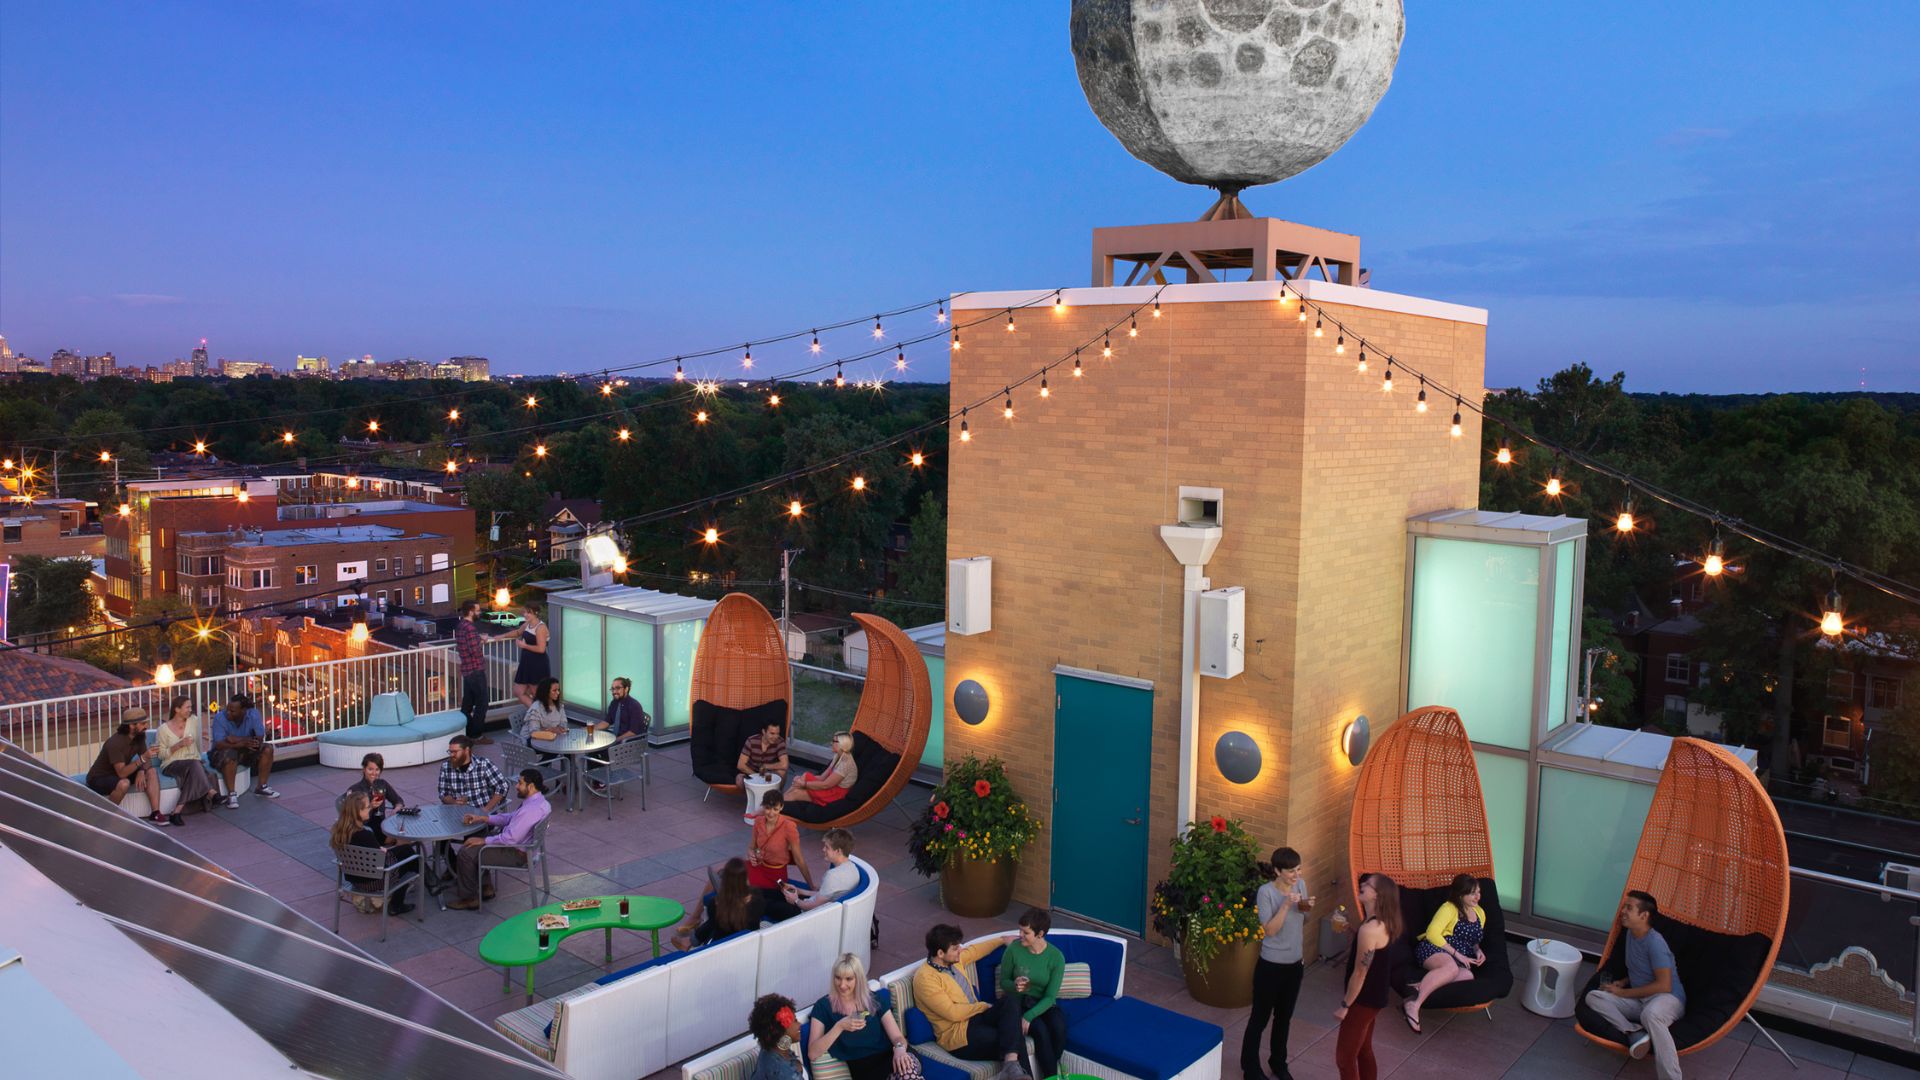 Moonrise Hotel has a rooftop bar for funky, retro nightlife.